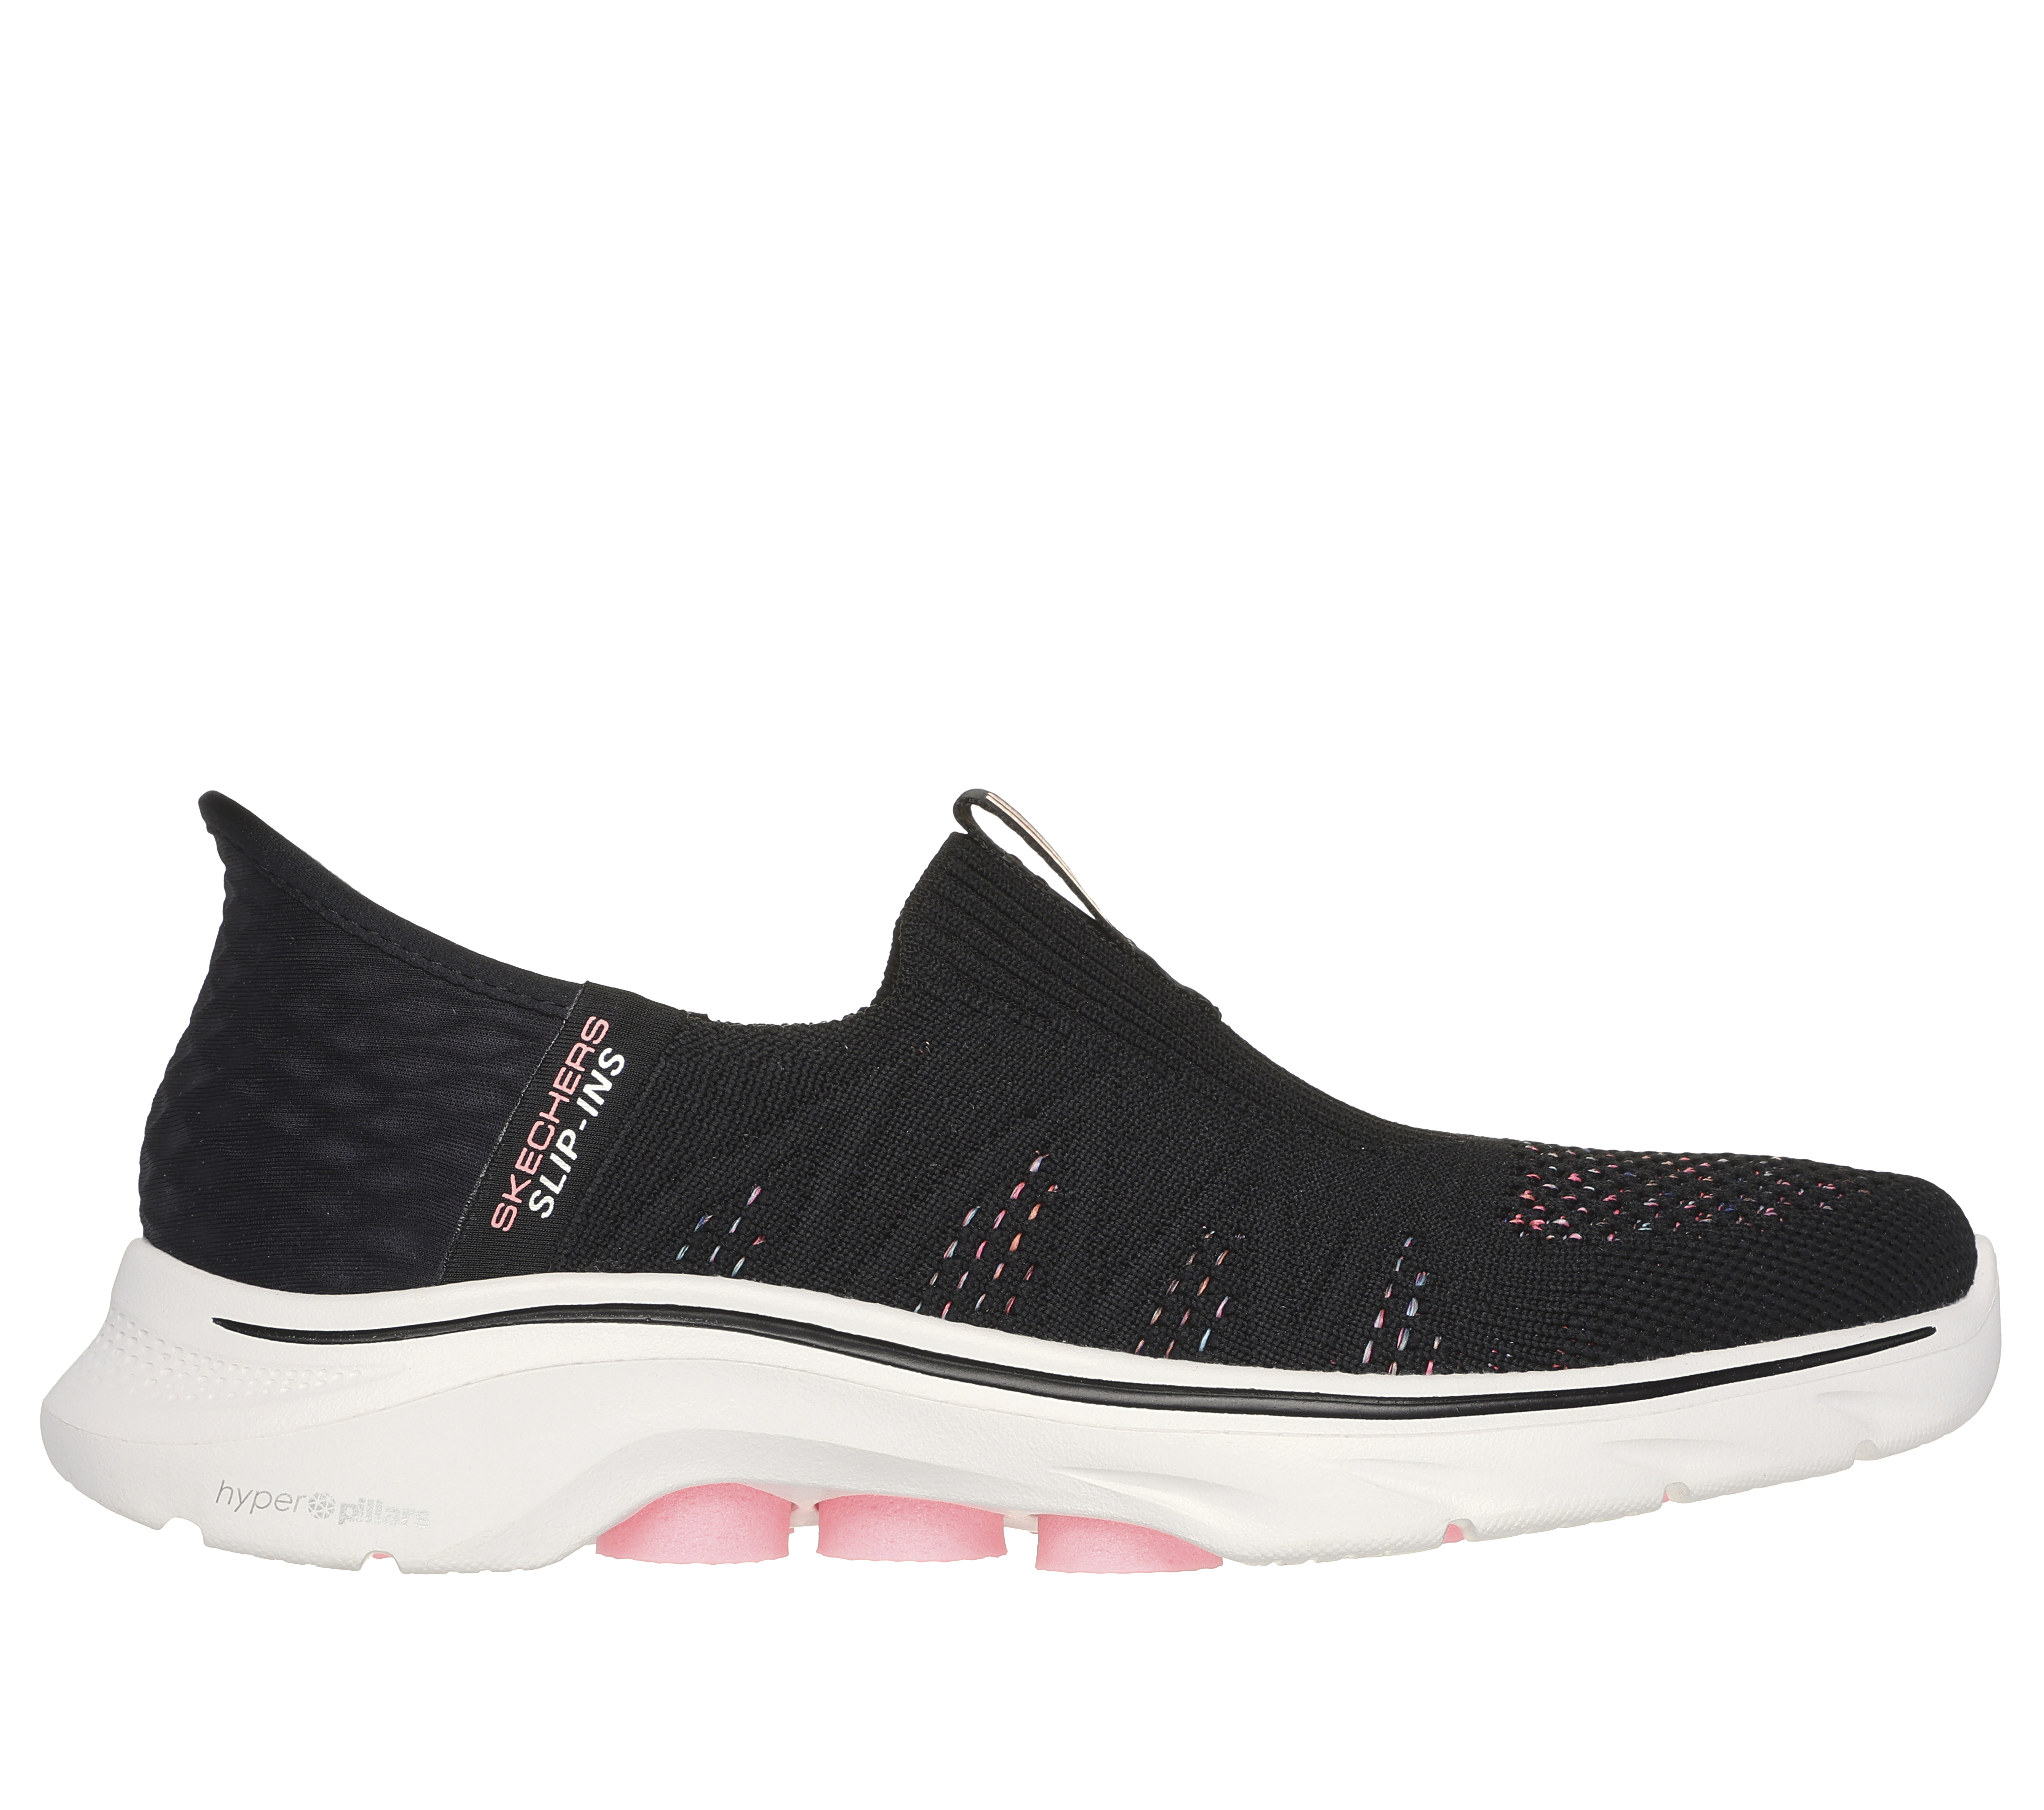 SKECHERS - Check out our comfortable and stylish range of #Skechers apparel  available online now! 🏃🏽‍♀️